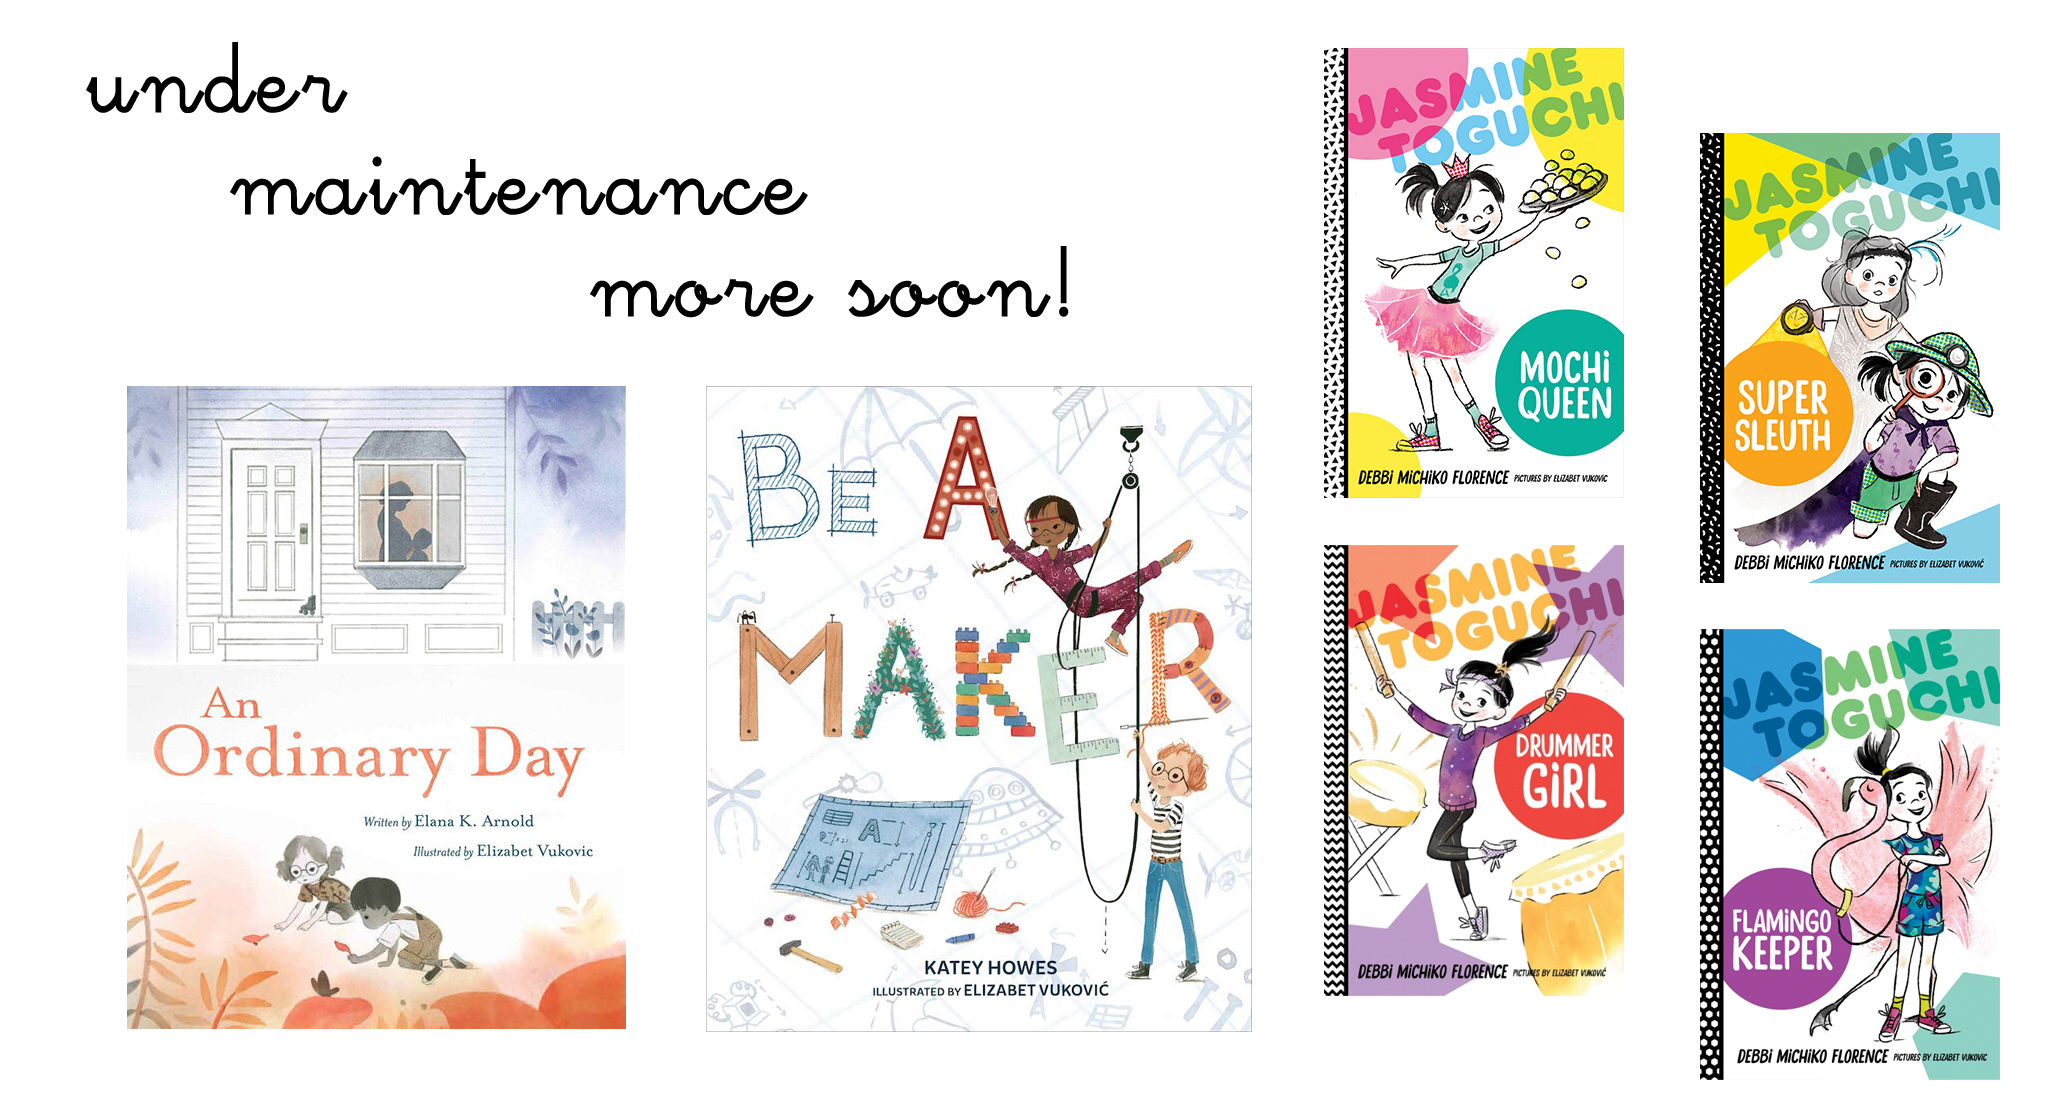 Books illustrated by Elizabet Vukovic, page is under maintenance